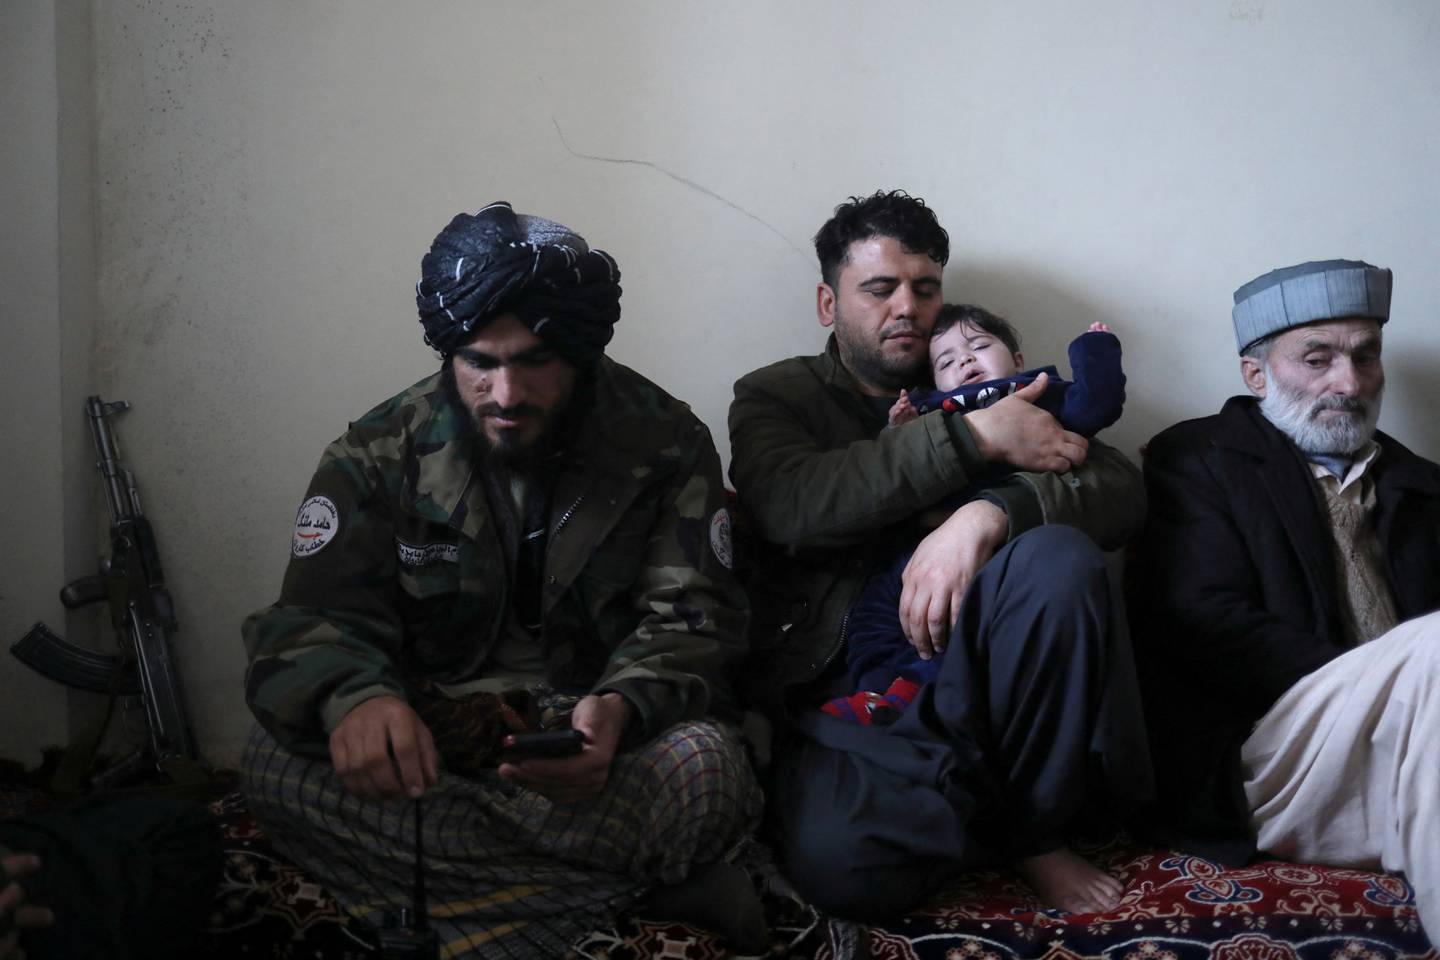 Hamid Safi, who found Sohail Ahmadi in the airport, holds the baby next to Sohail's grandfather Mohammad Qasem Razawi and a Taliban representative. Reuters